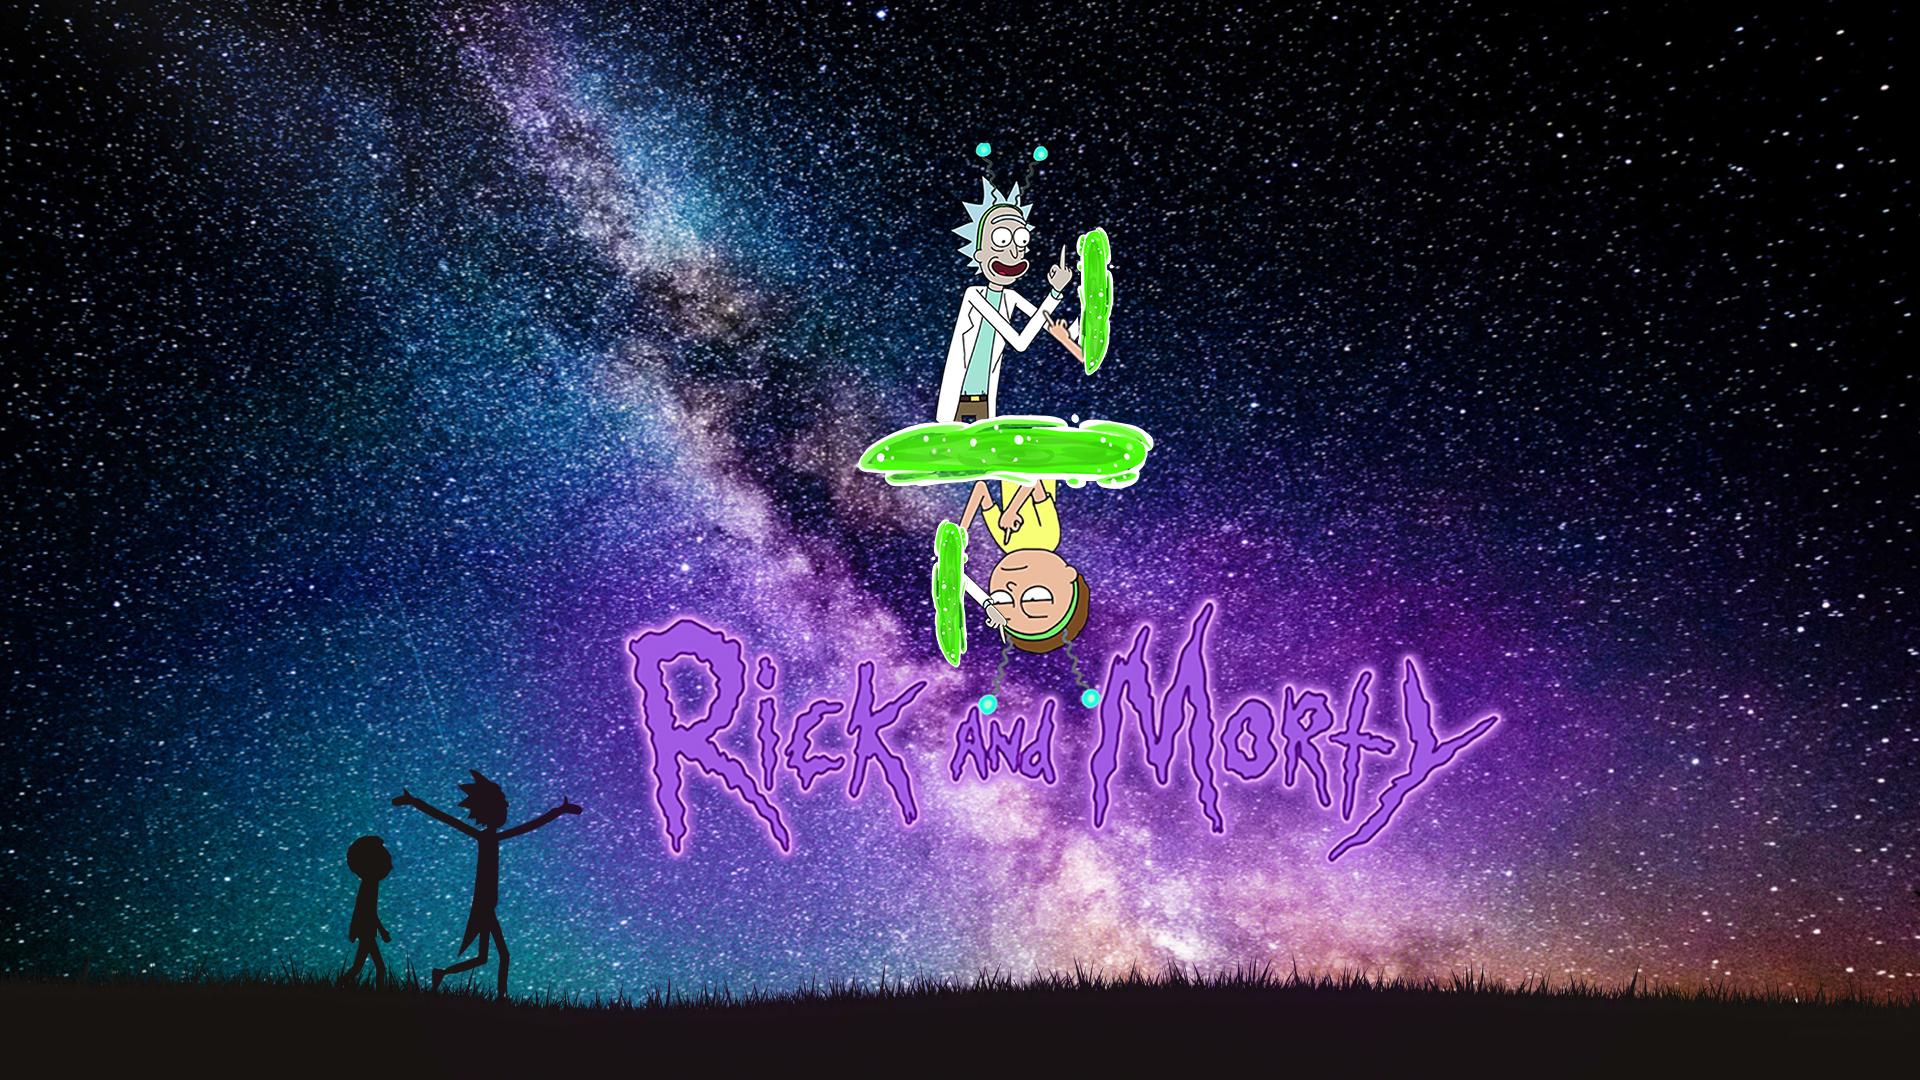 rick and morty wallpaper 1920x1080,cartoon,font,graphic design,illustration,fictional character